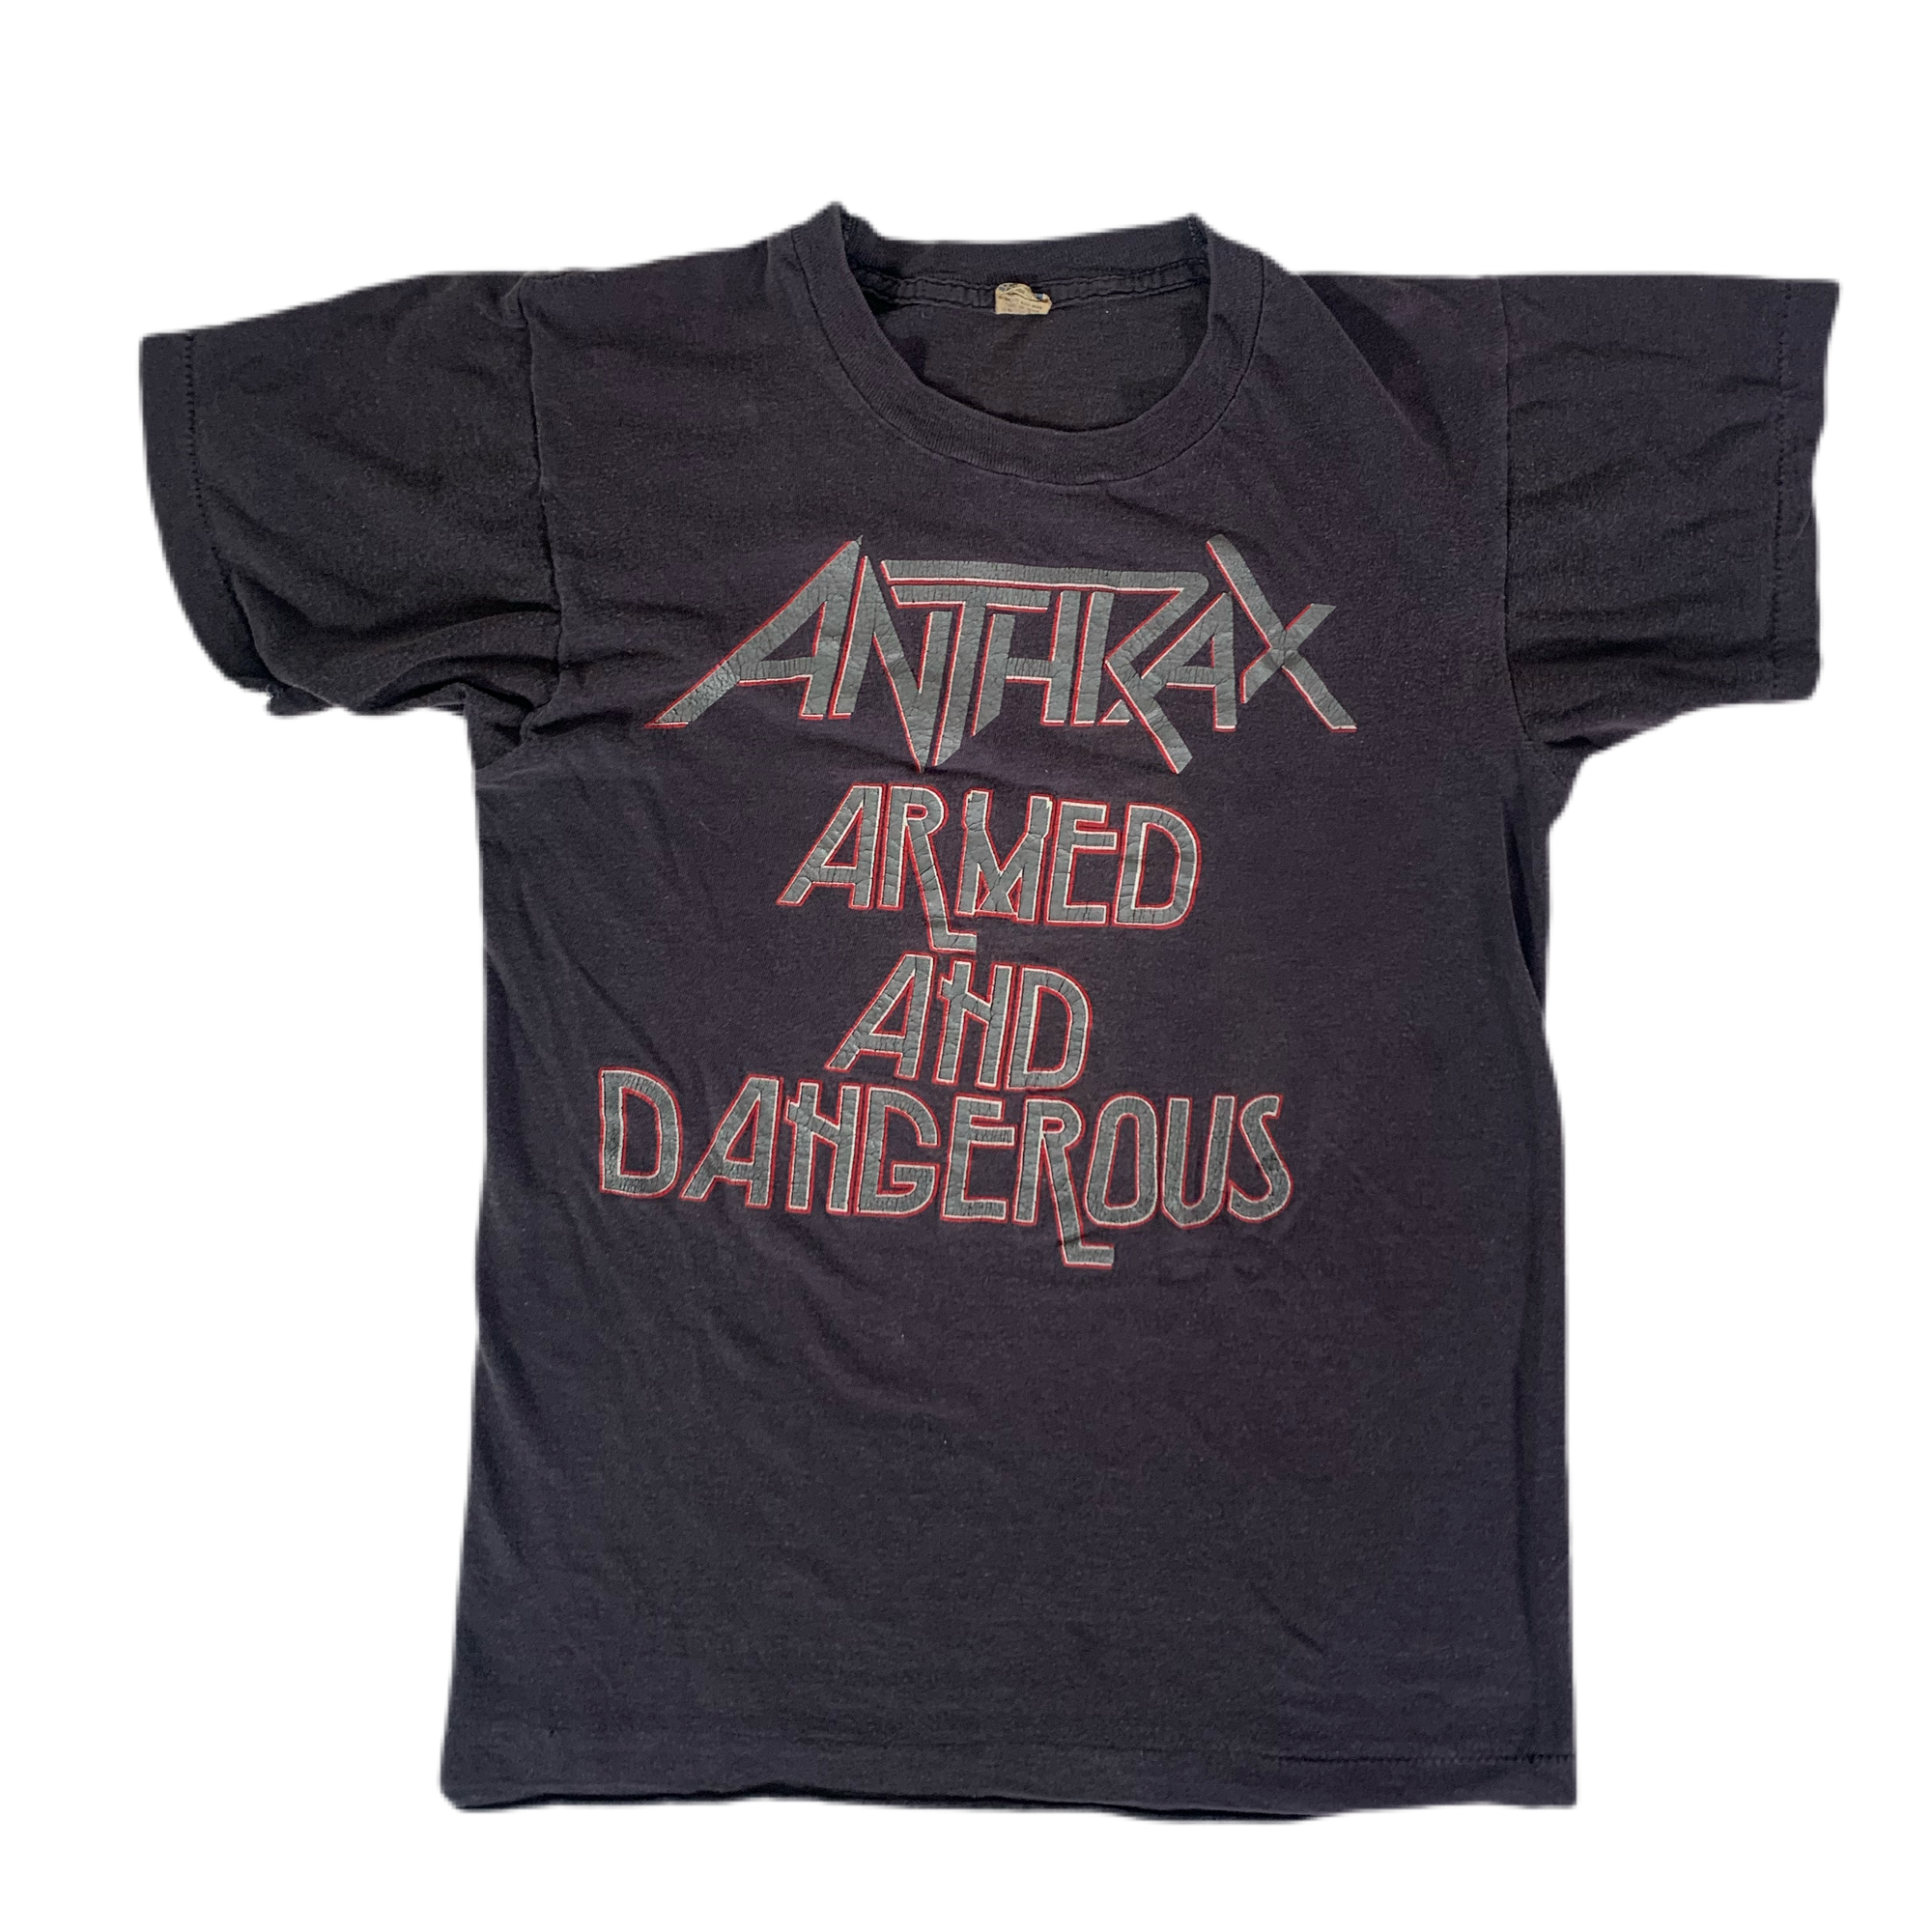 Vintage Anthrax "Armed And Dangerous" T-Shirt - jointcustodydc